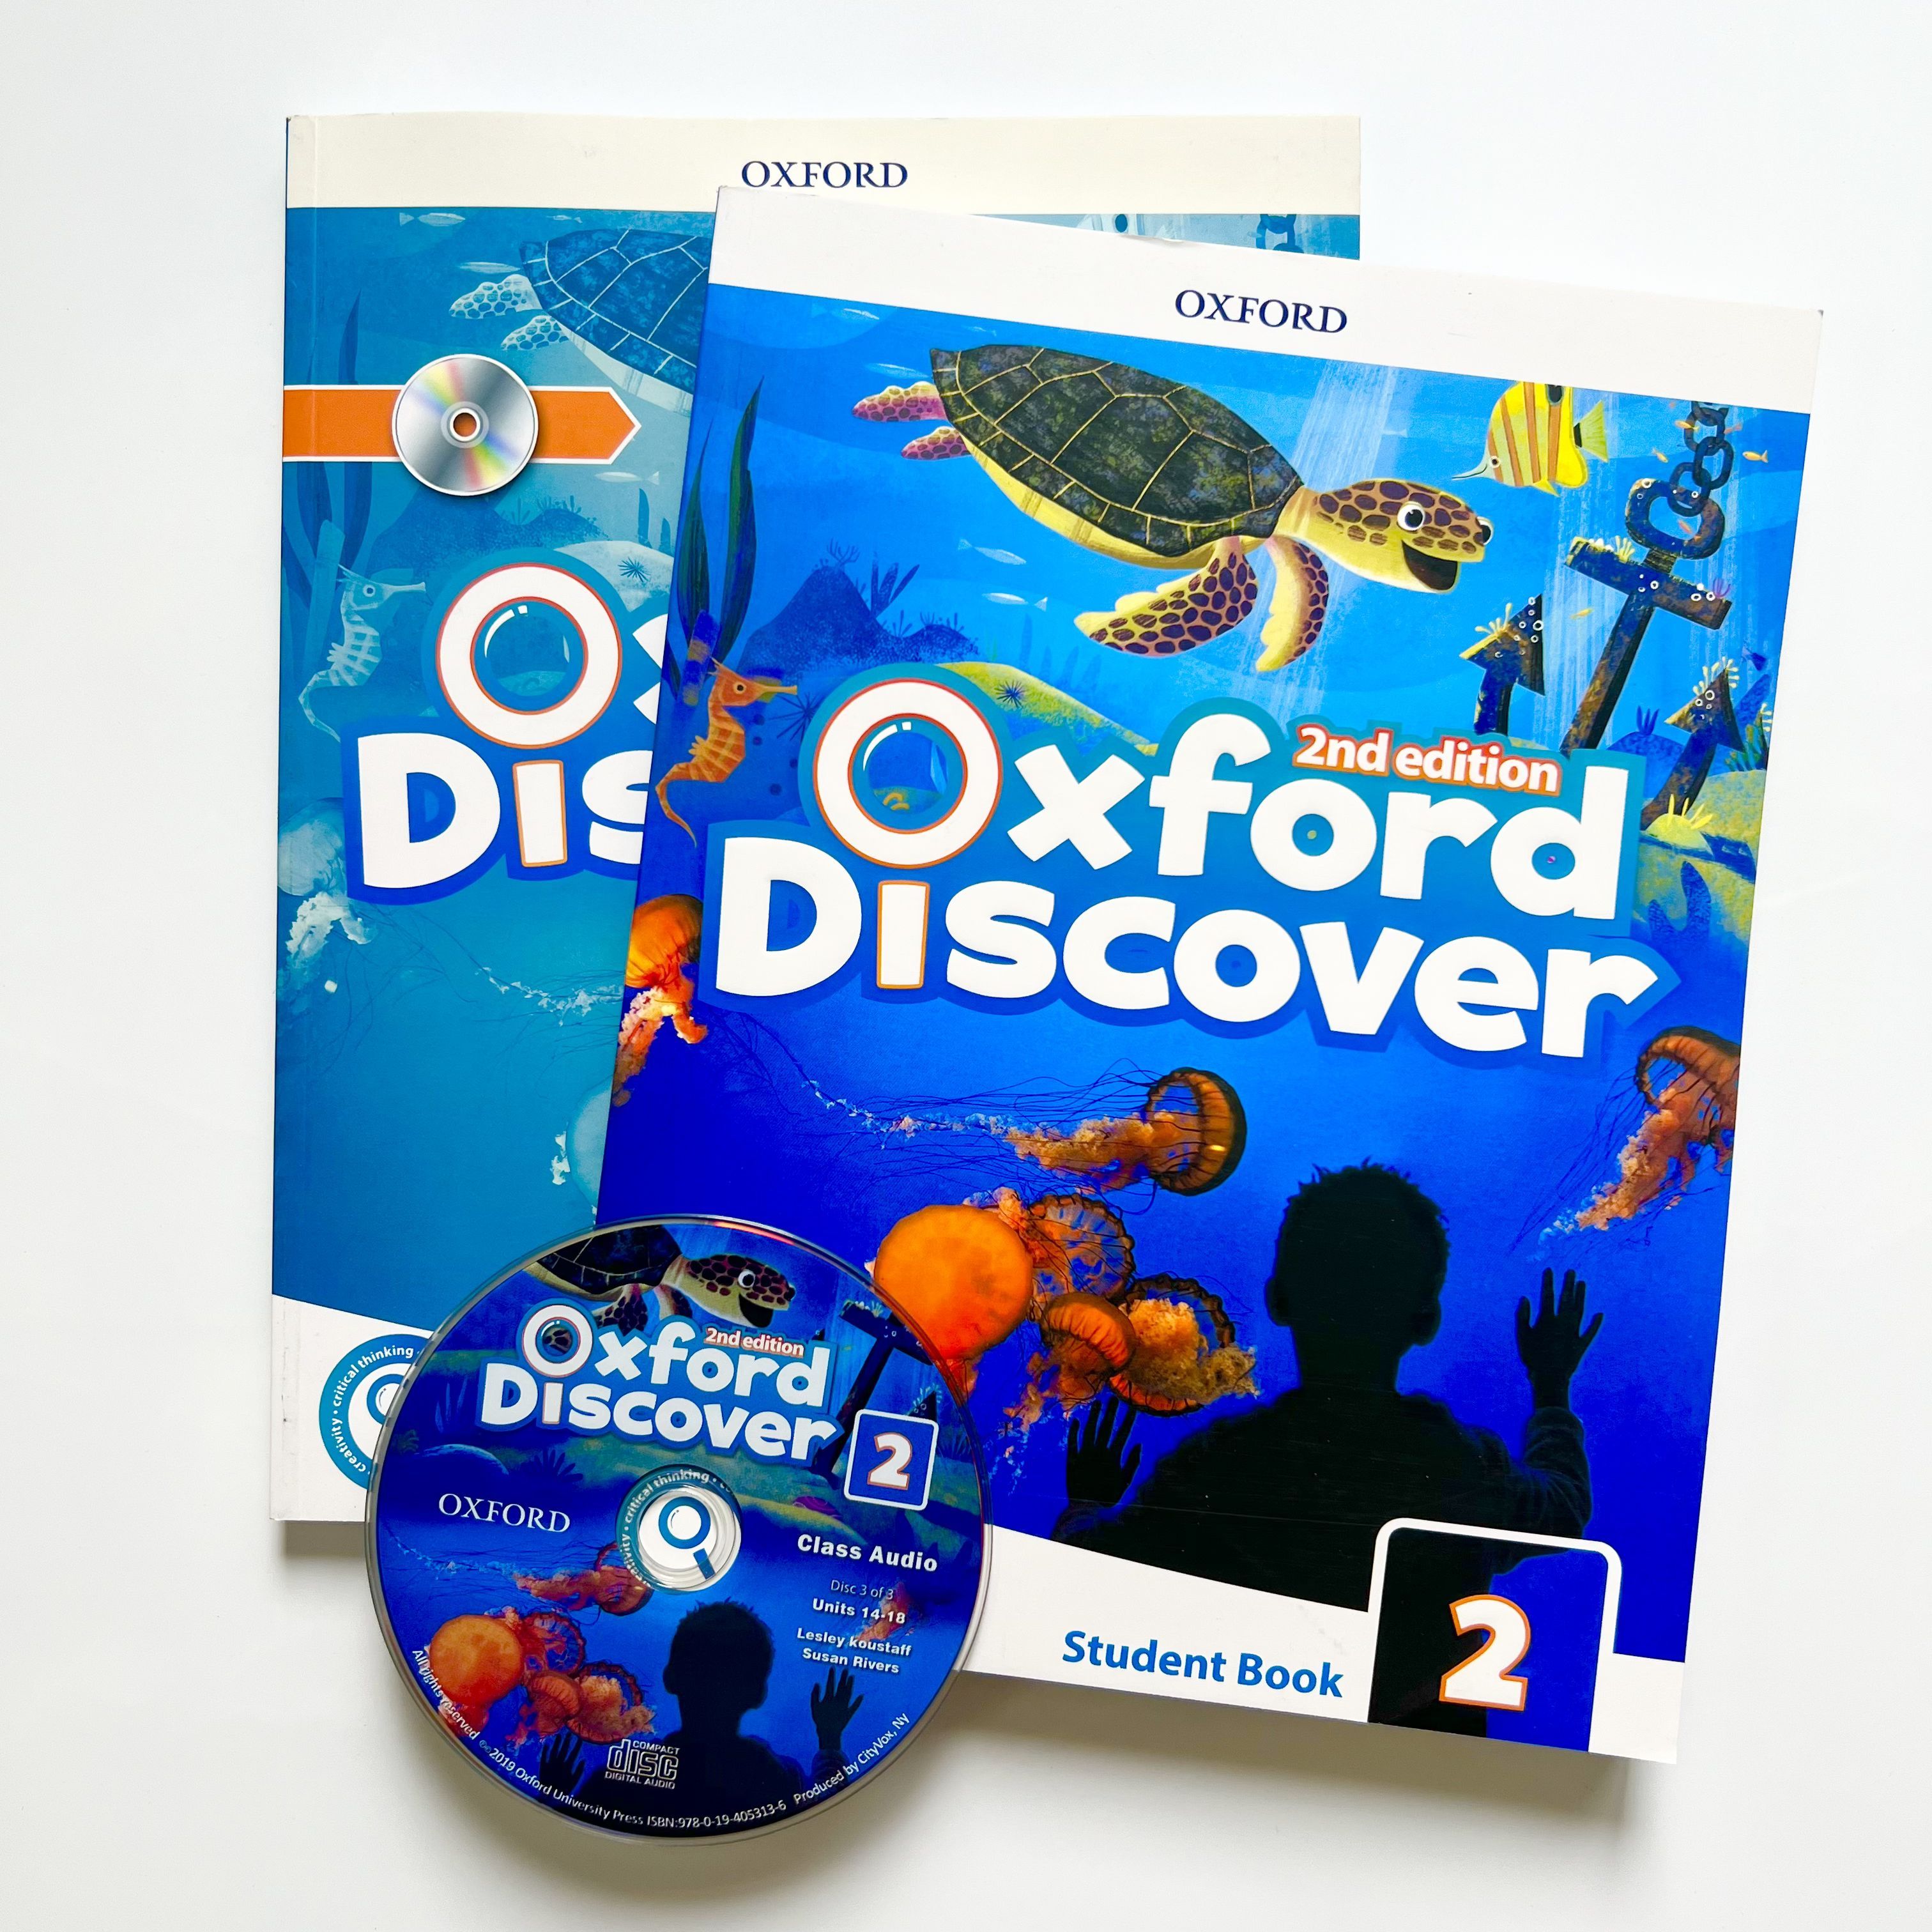 Oxford discover book. Oxford discover 2. Oxford discover. Oxford discover 2nd Edition. Oxford discover 2: posters.